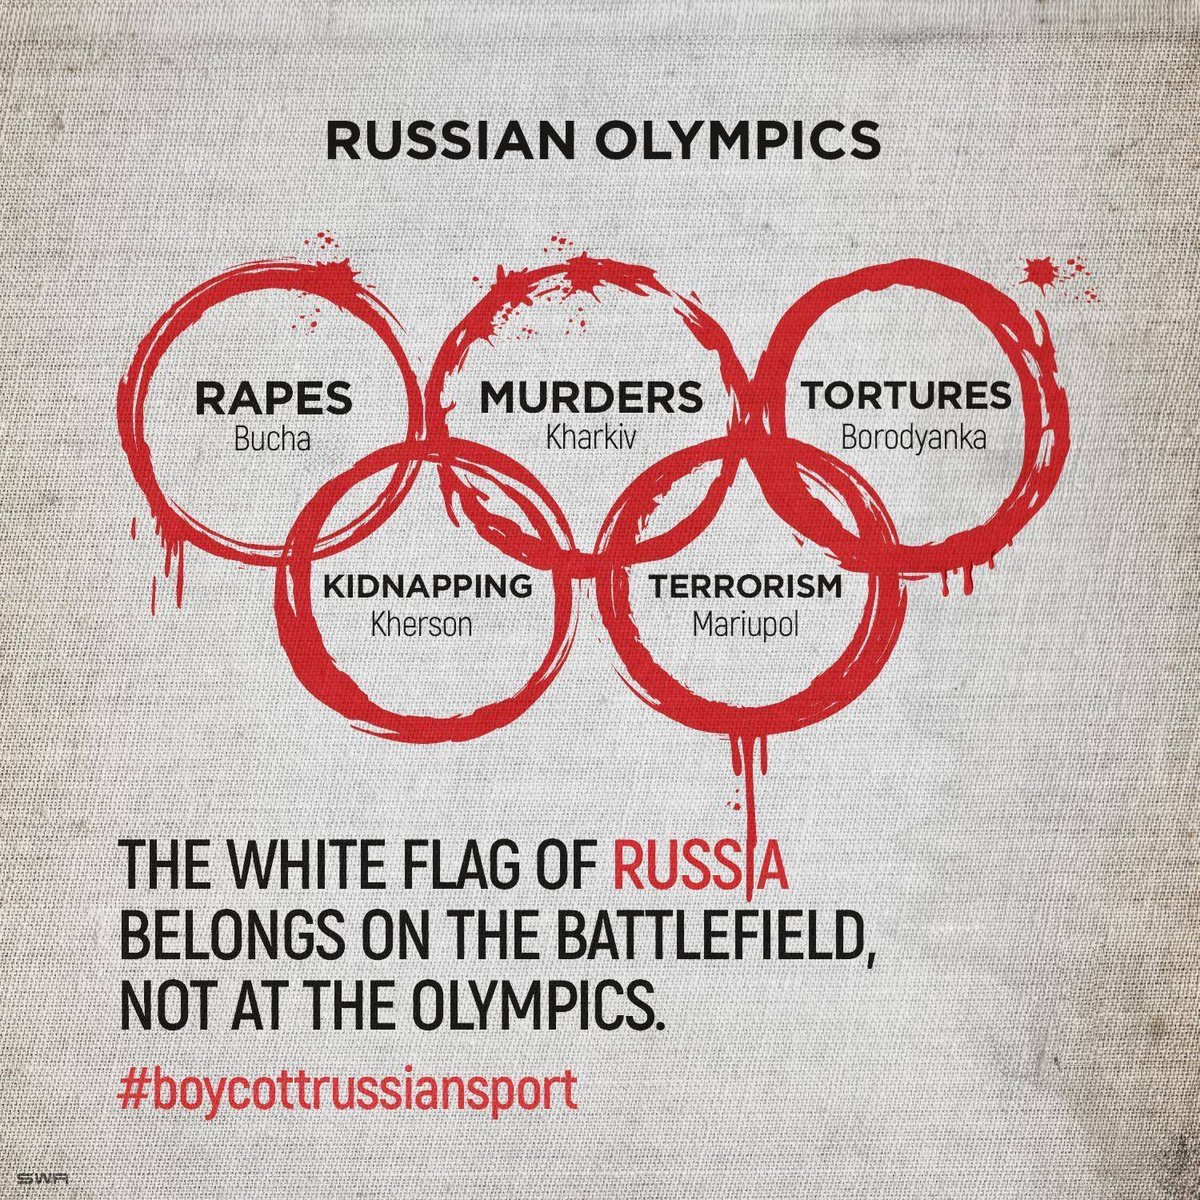 Shame on You @iocmedia ! The olympic rings will cry the blood of Ukrainians in Paris 😡 The place of Russian athletes is not in Olympics. #boycottrussiansport #ioc #Paris